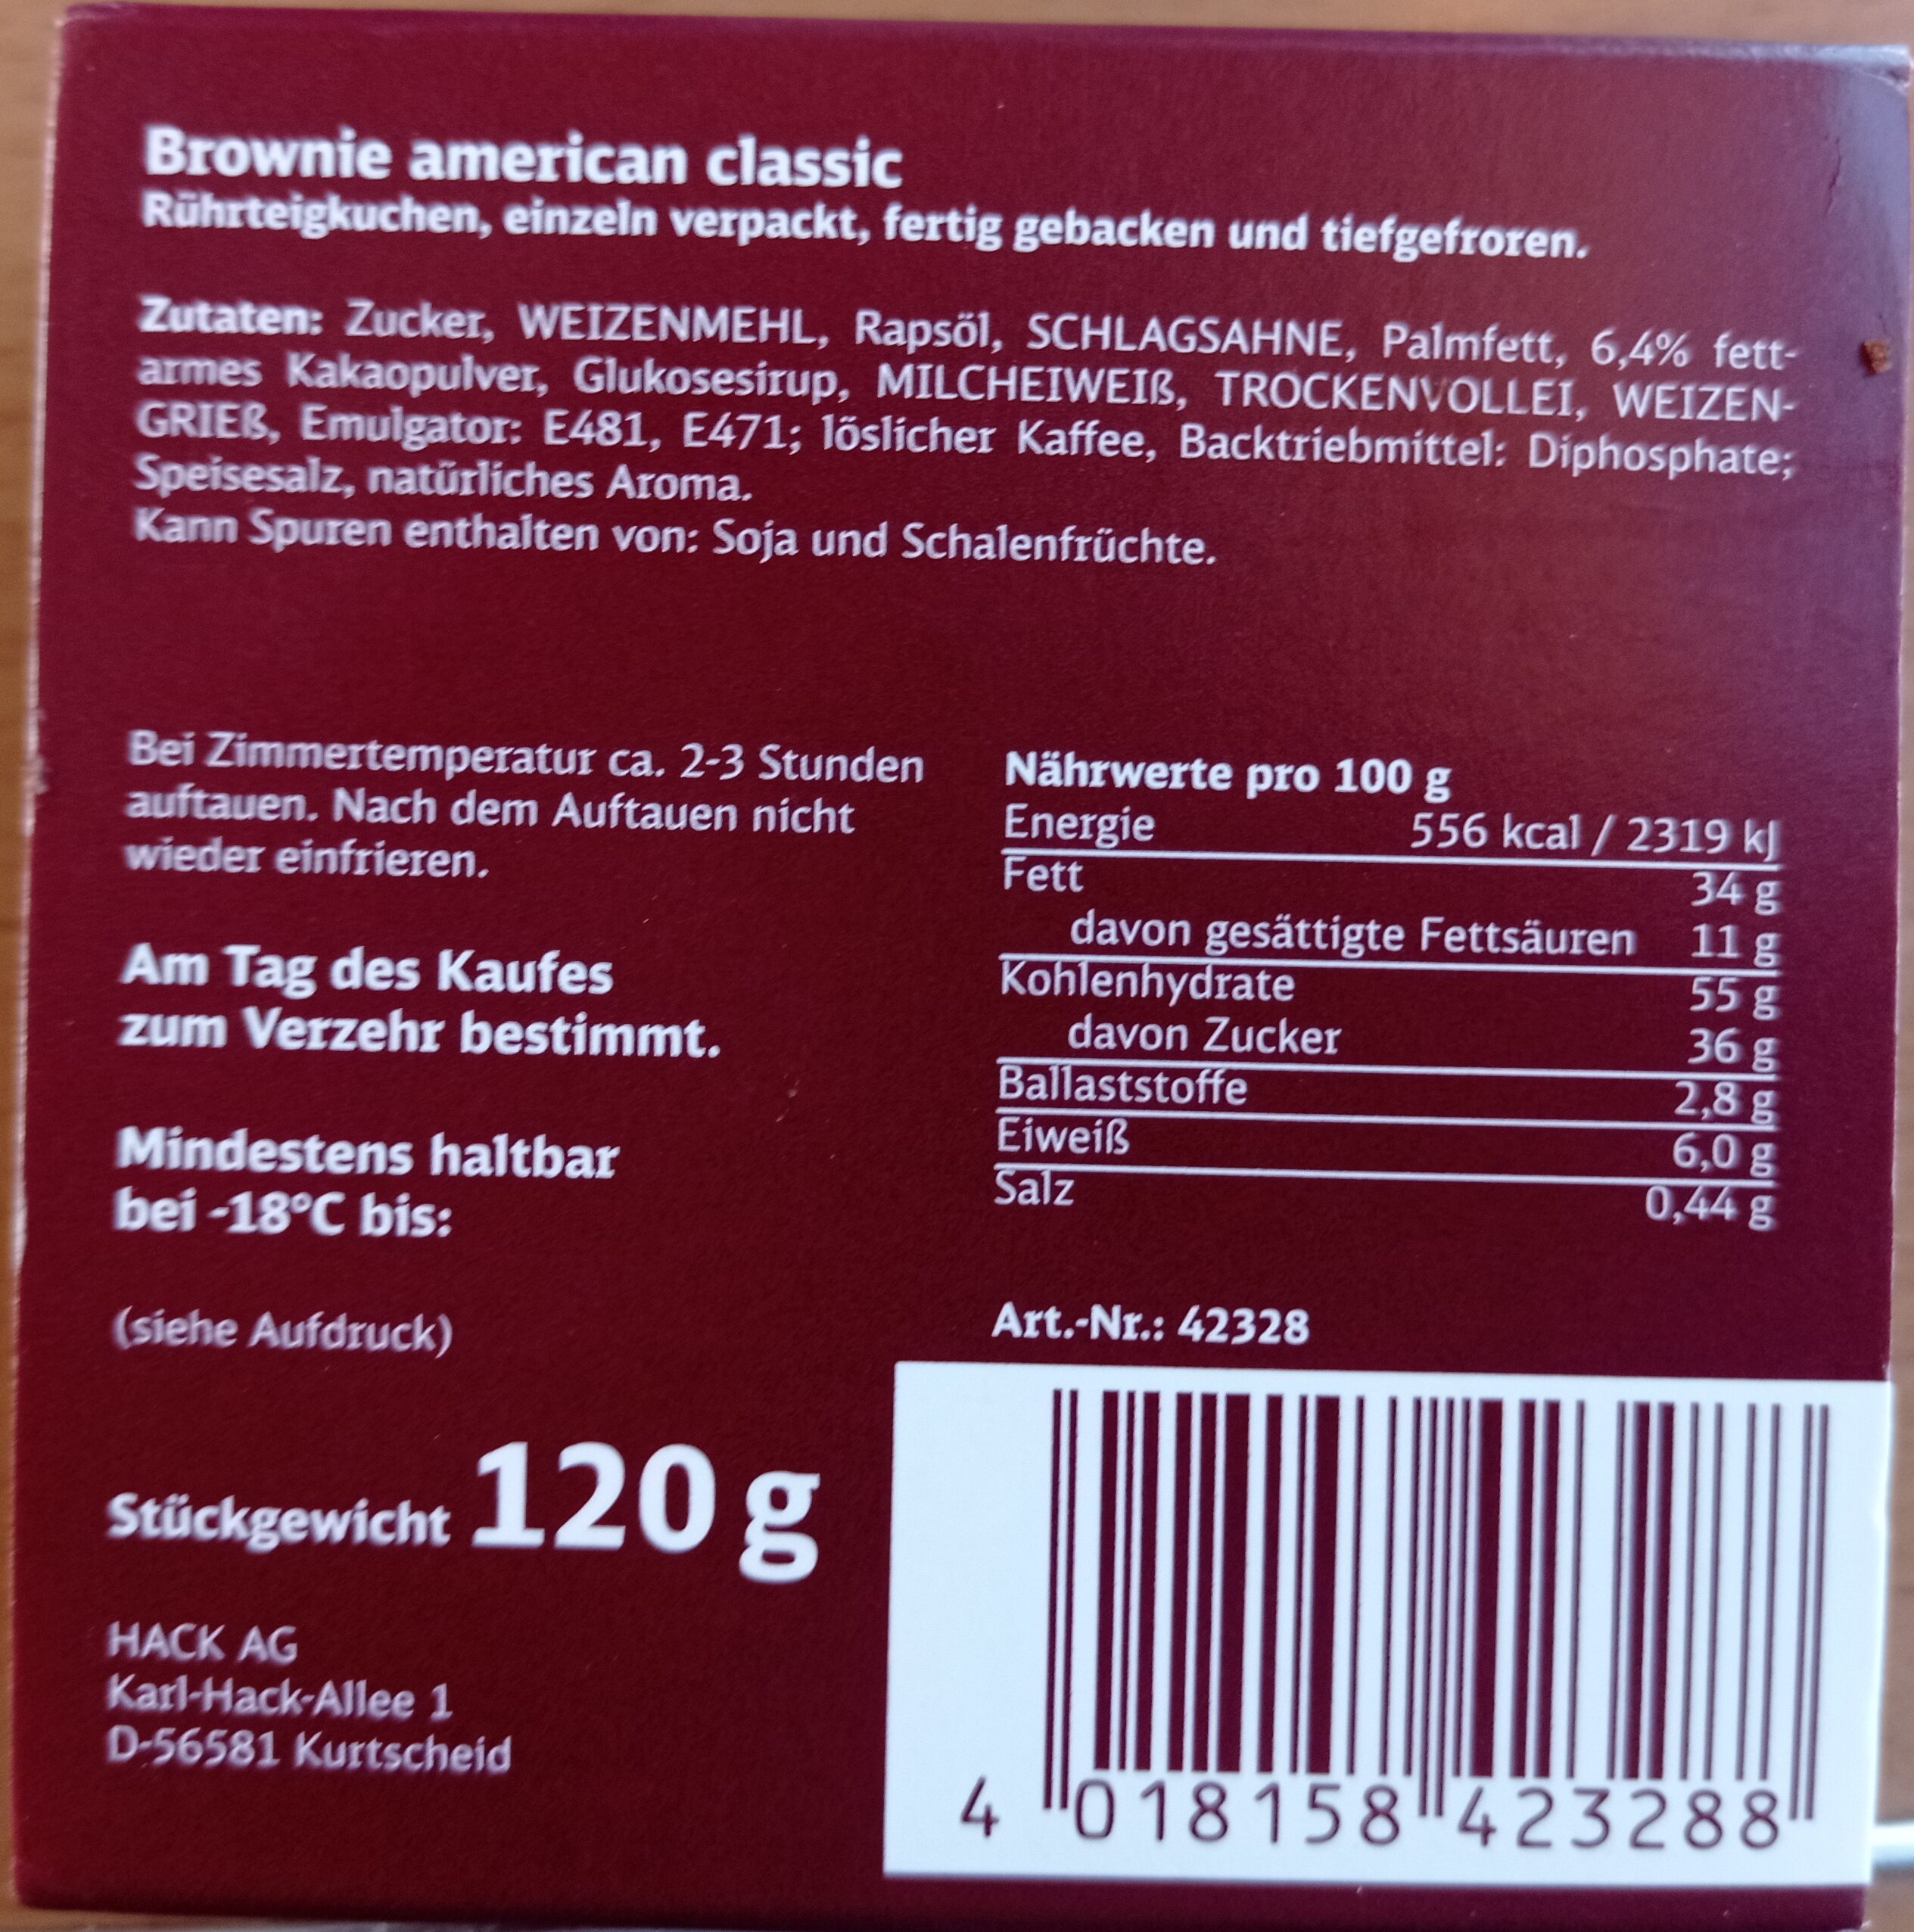 Brownie american classic - Product - de